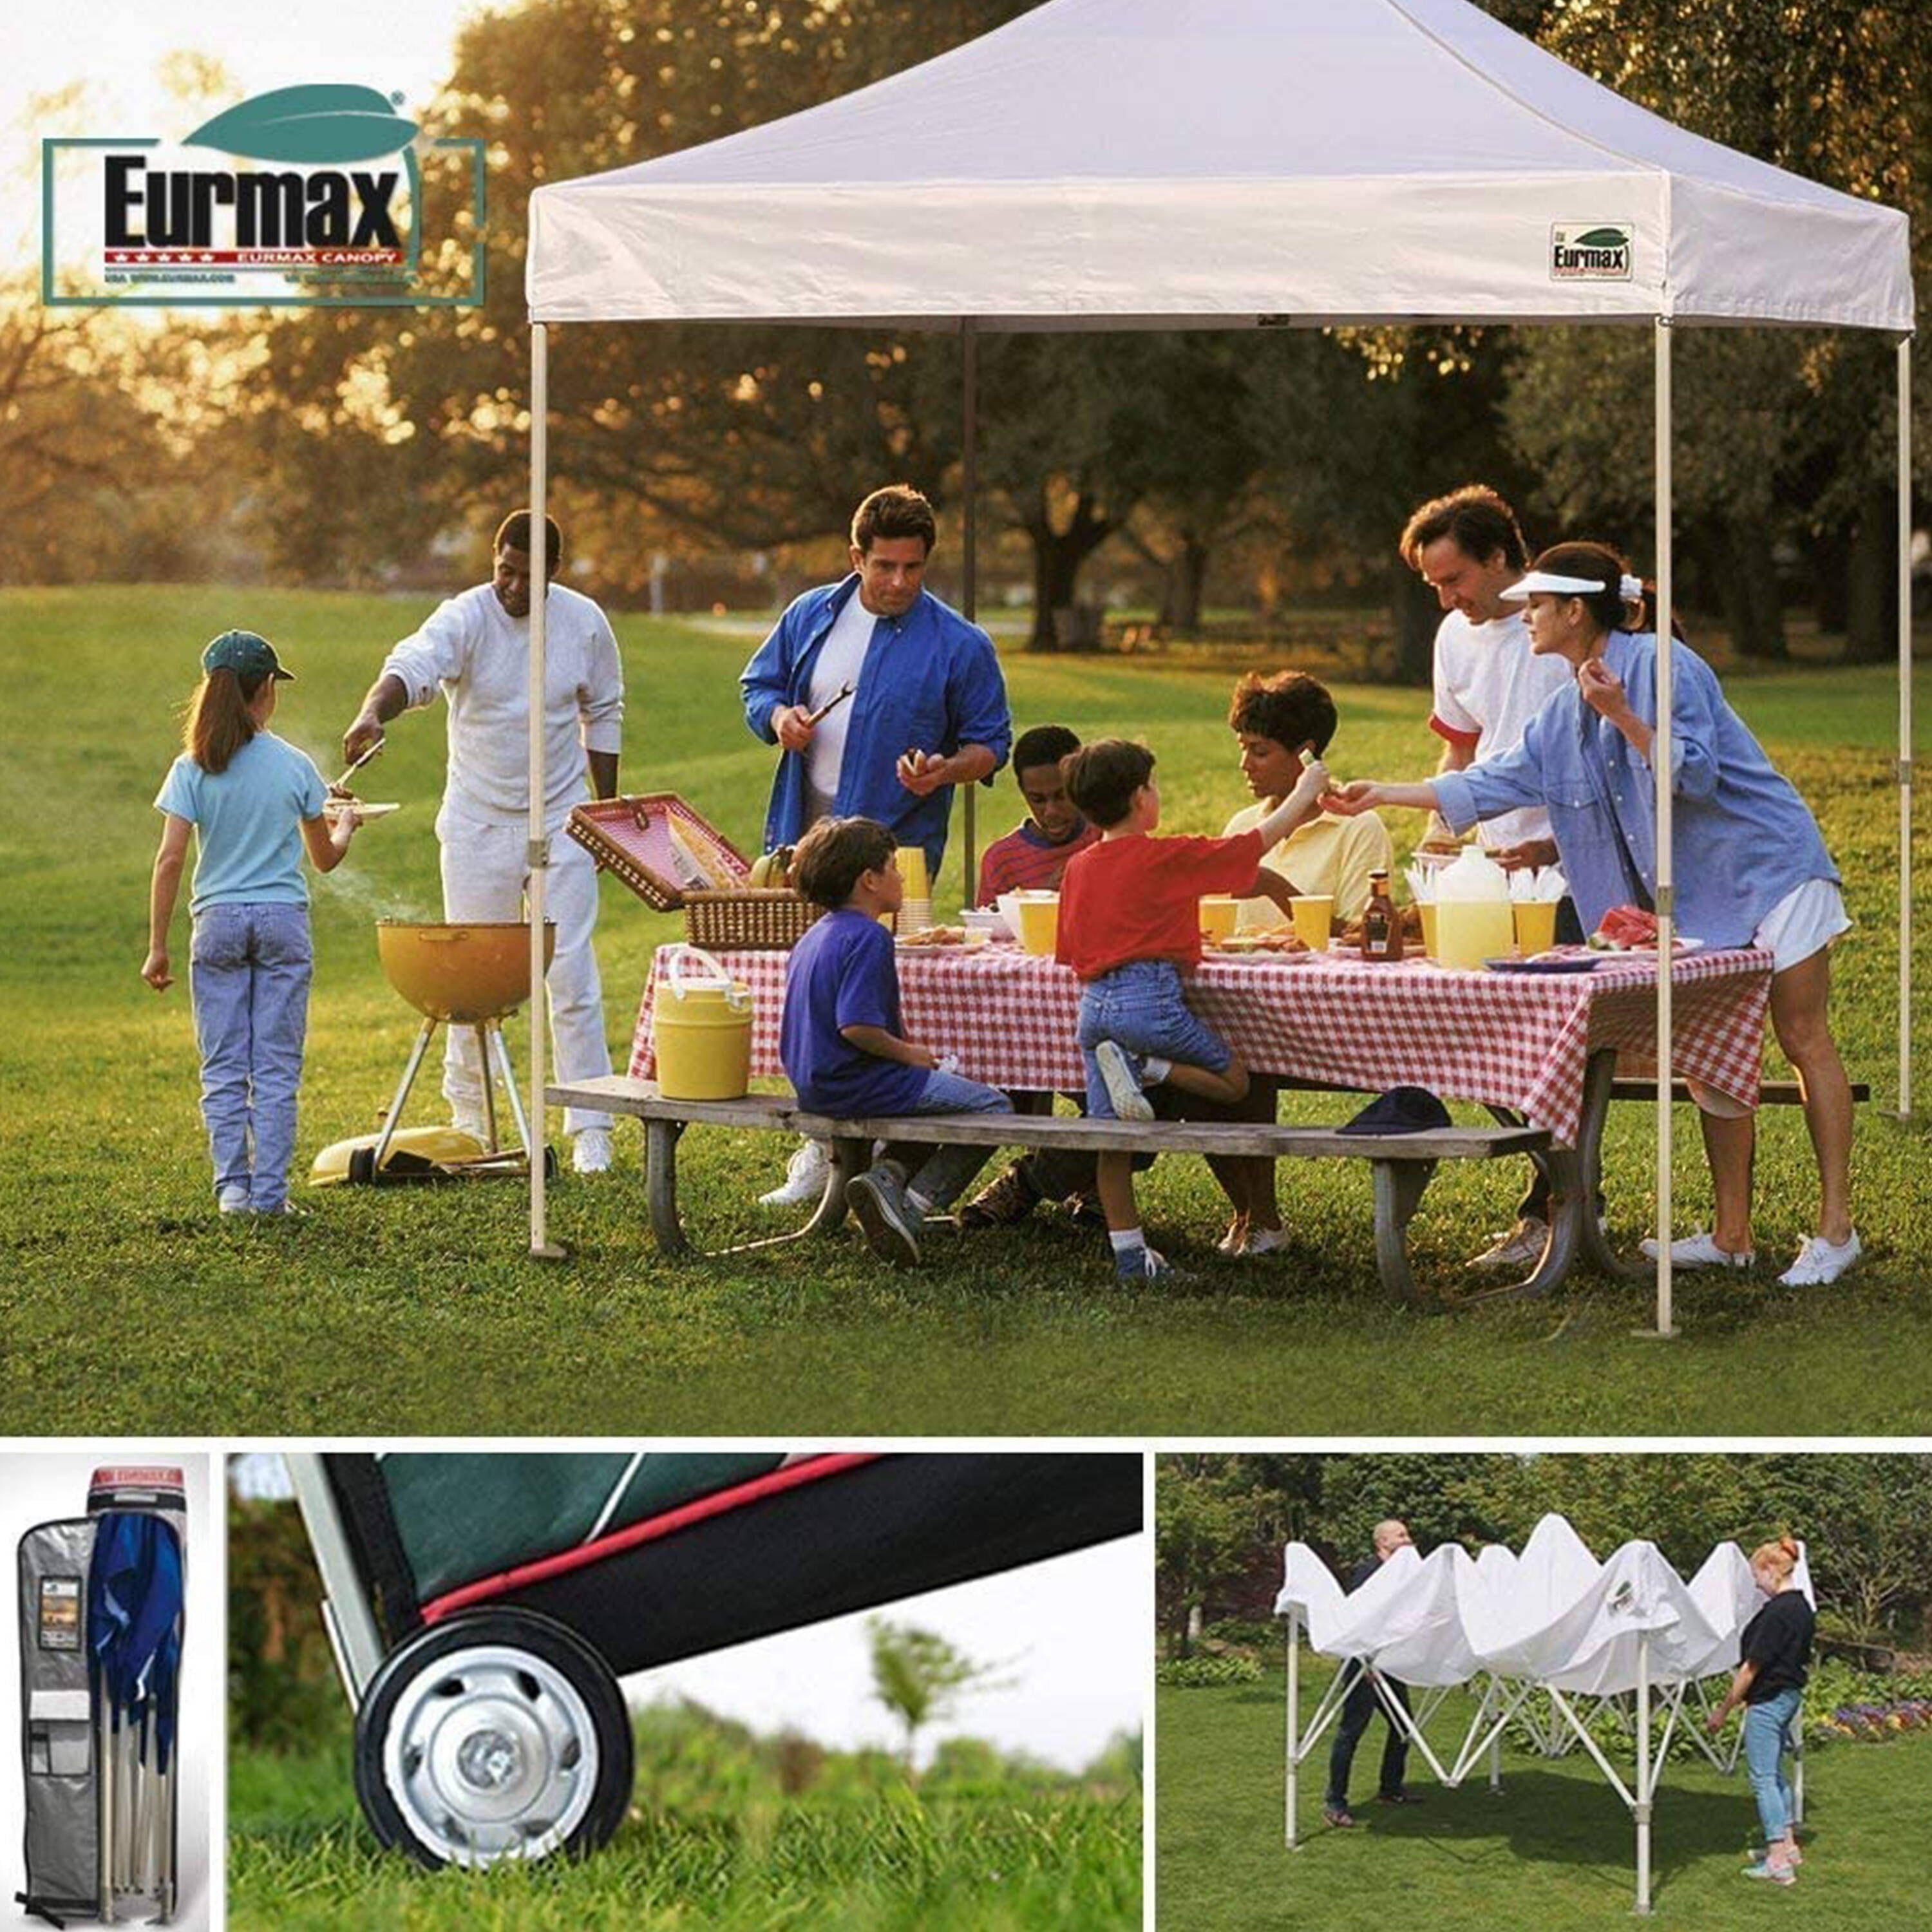 Eurmax 5x5 Pop up Canopy Outdoor Heavy Duty Tent,White